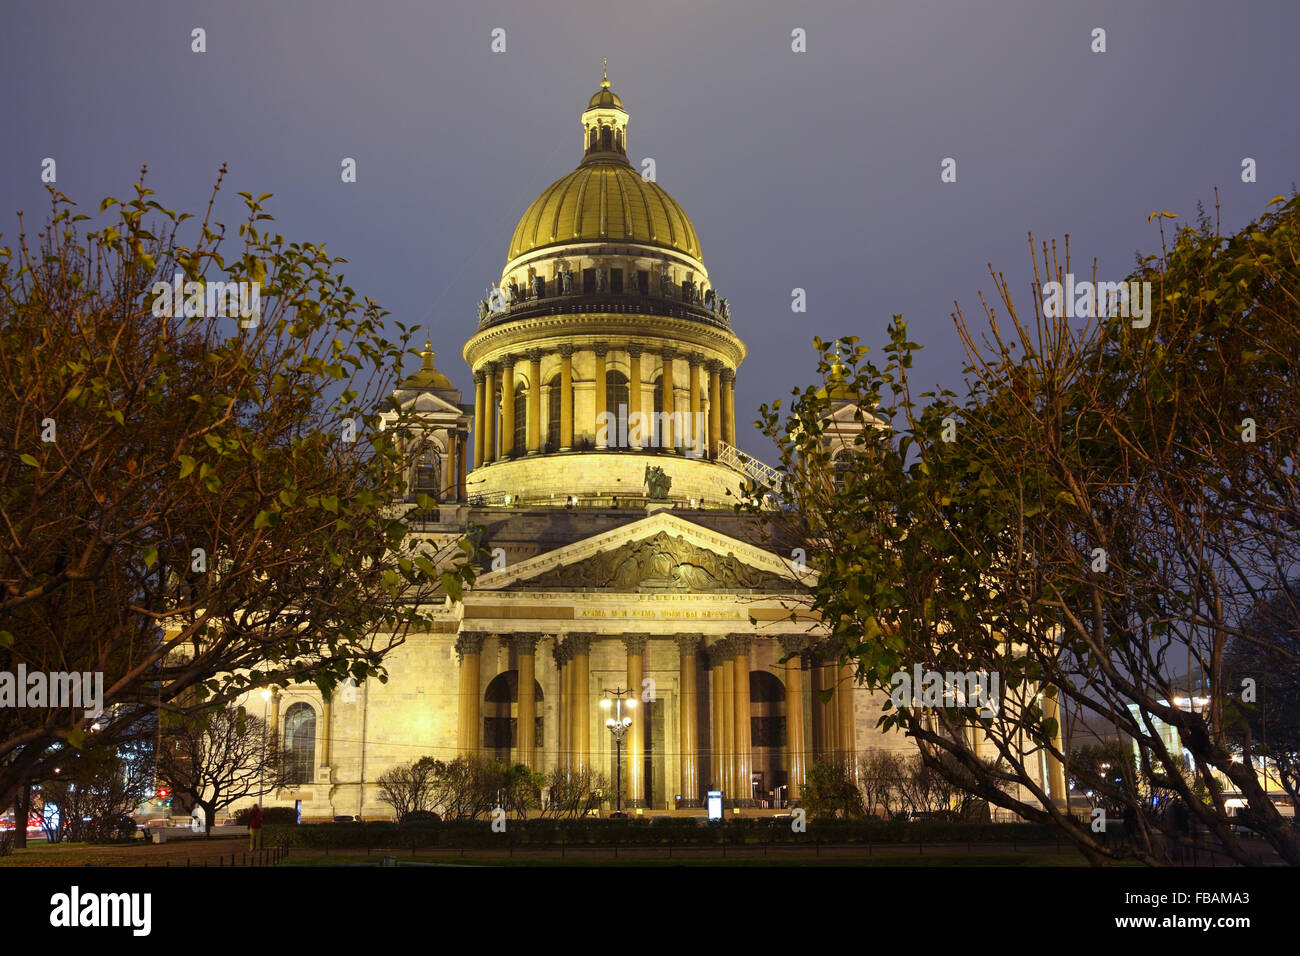 St. Petersburg, St. Isaac's Cathedral Stock Photo